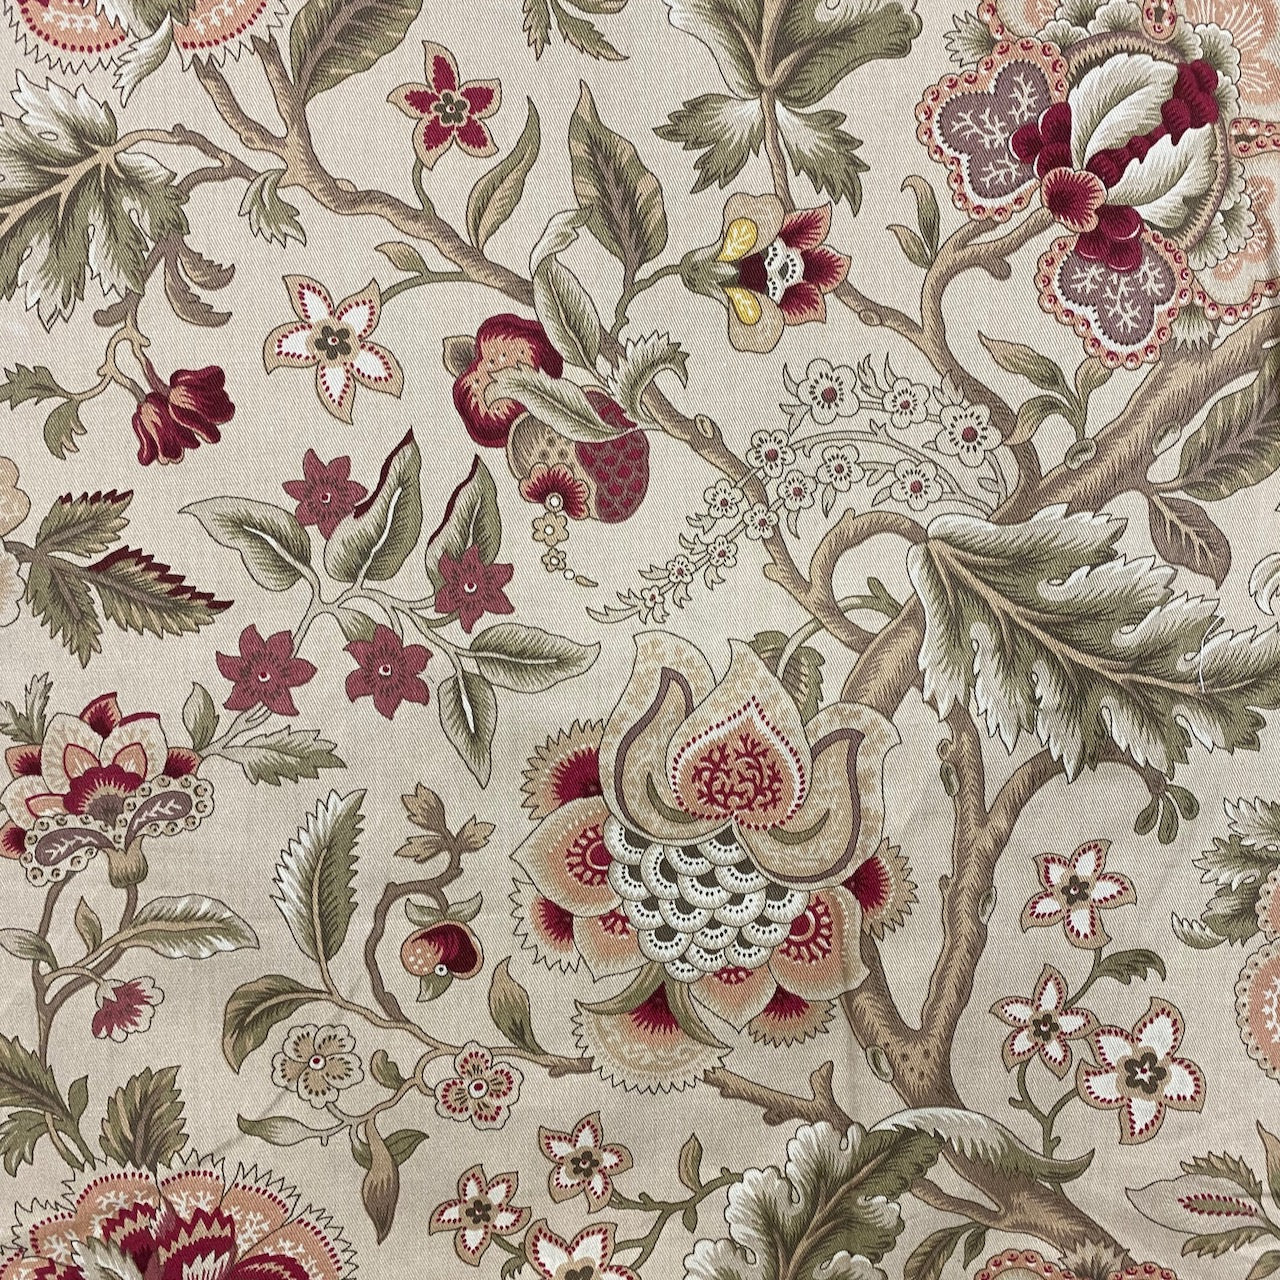 Floral Blooms Home Decor Fabric